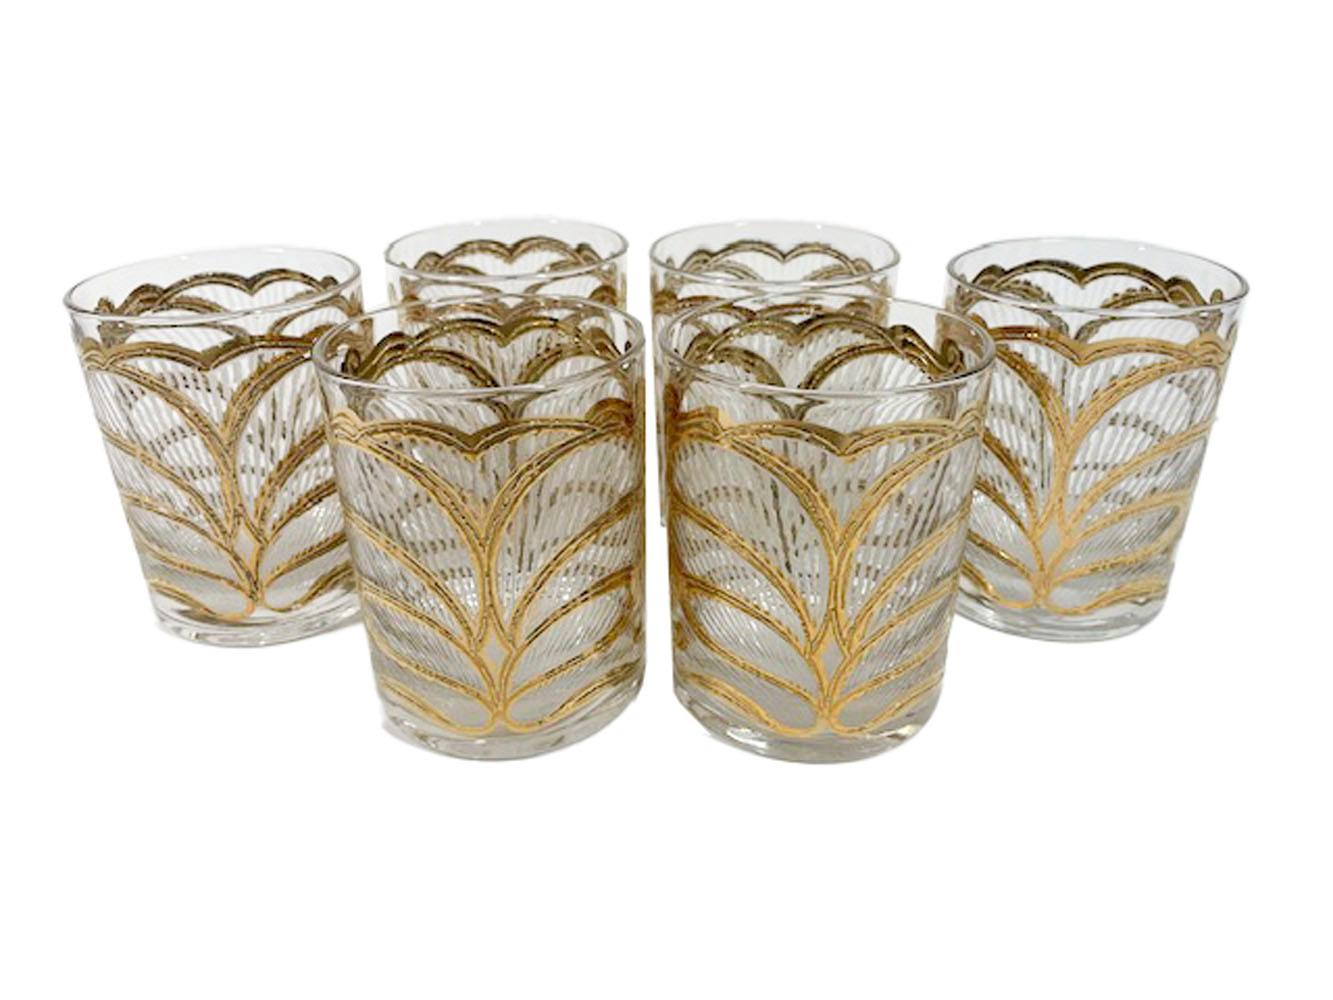 Set of six Mid-Century Modern rocks glasses designed by Georges Briard for his 1966 catalog. Named 'Lotus' the pattern has a stylized flower motif outlined in raised 22k gold with fields on white 'icicle' texture.